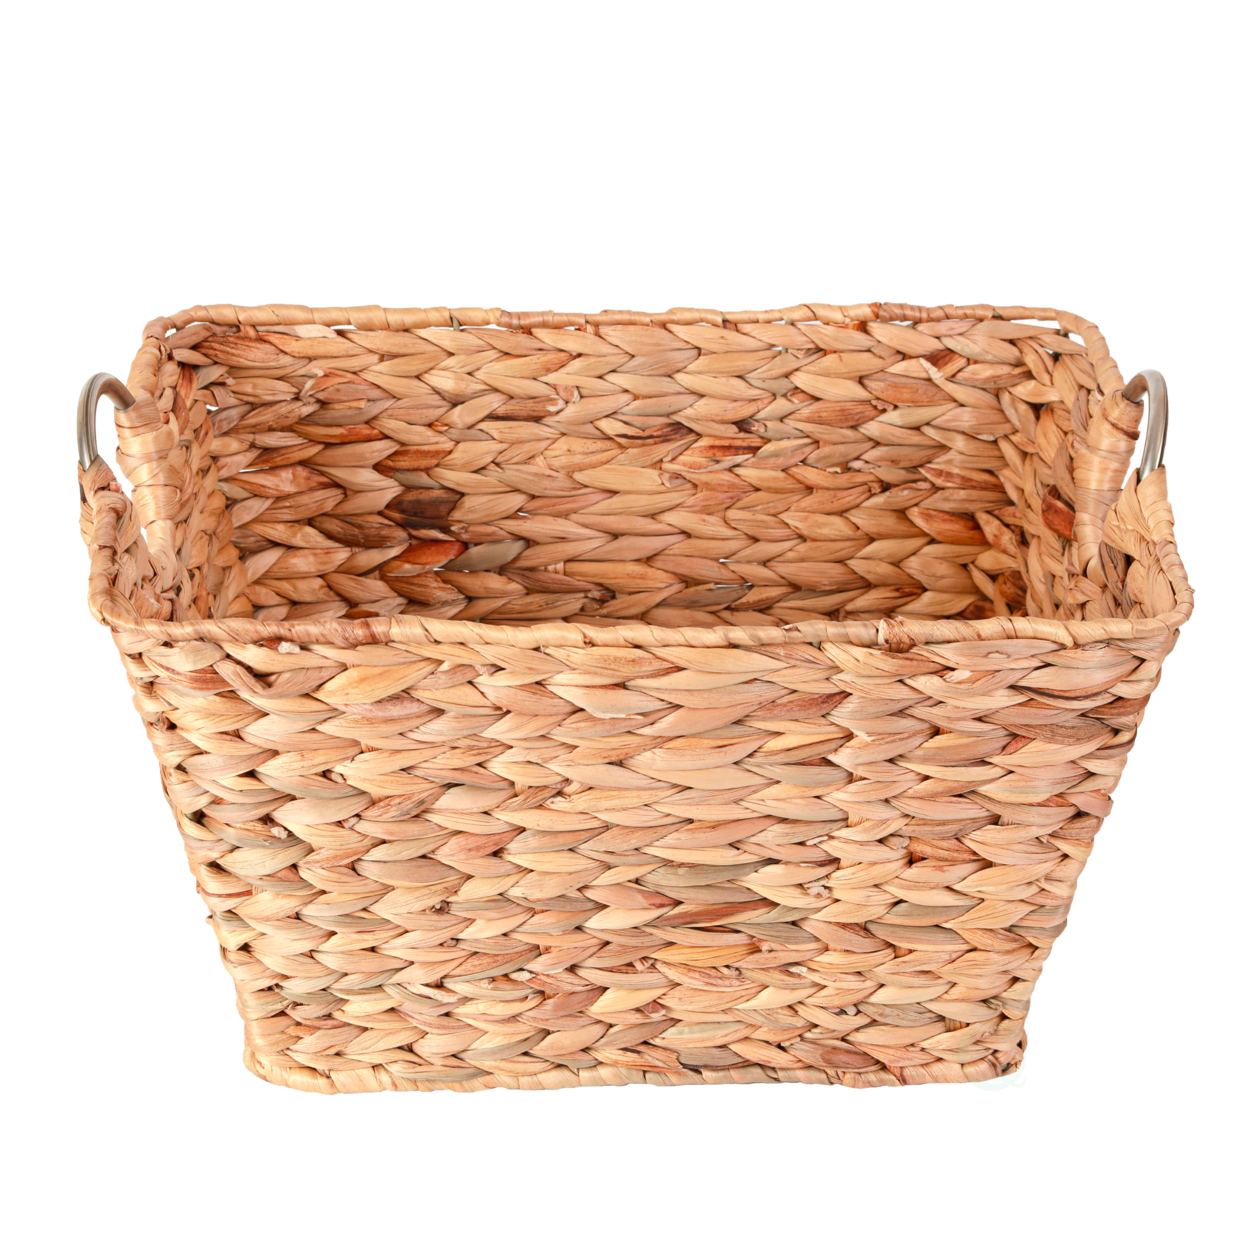 Water Hyacinth Wicker Large Square Storage Laundry Basket With Handles